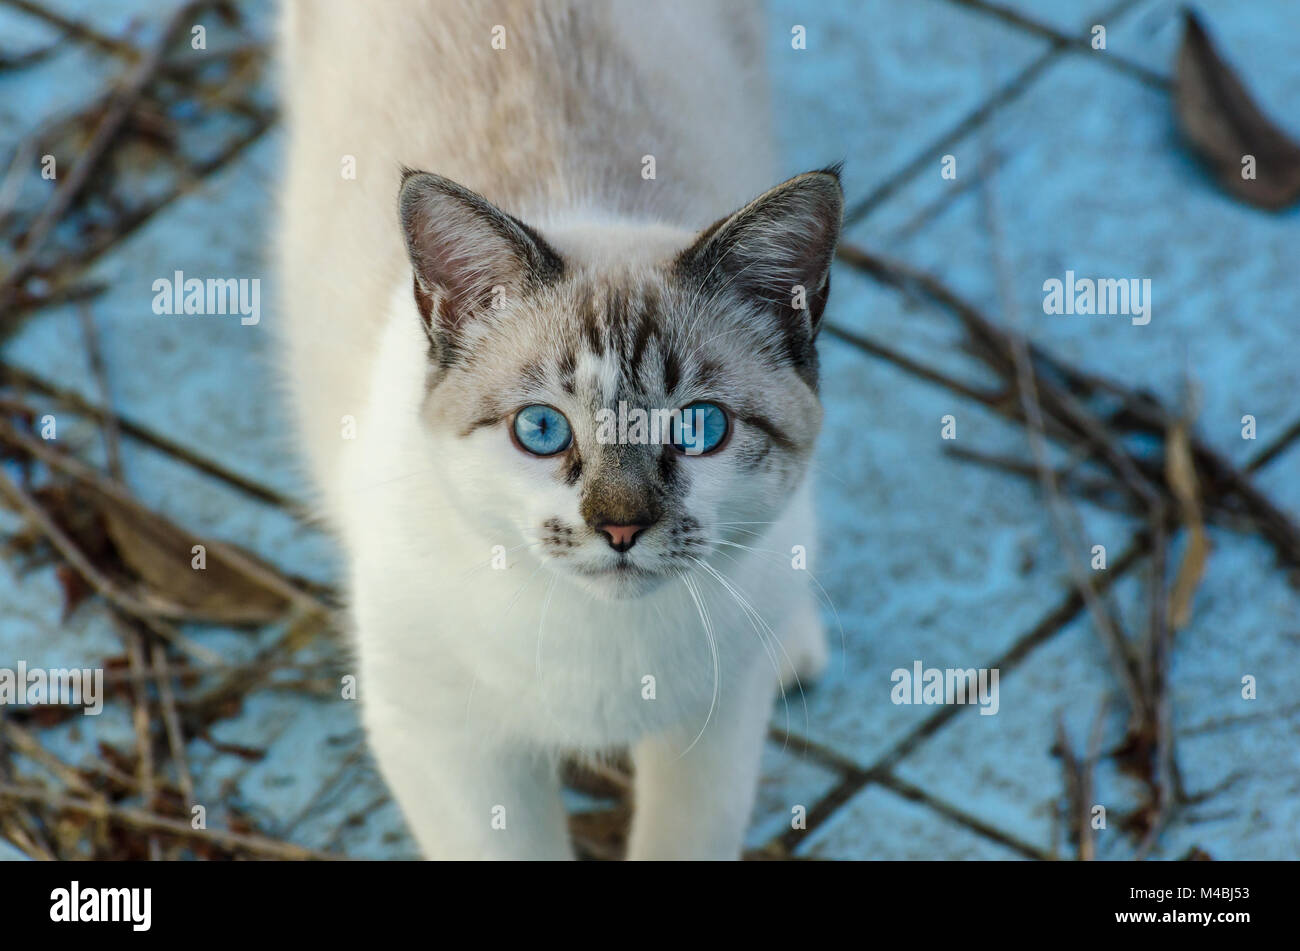 Cute cat with blue eyes playing inside an empty pool Stock Photo